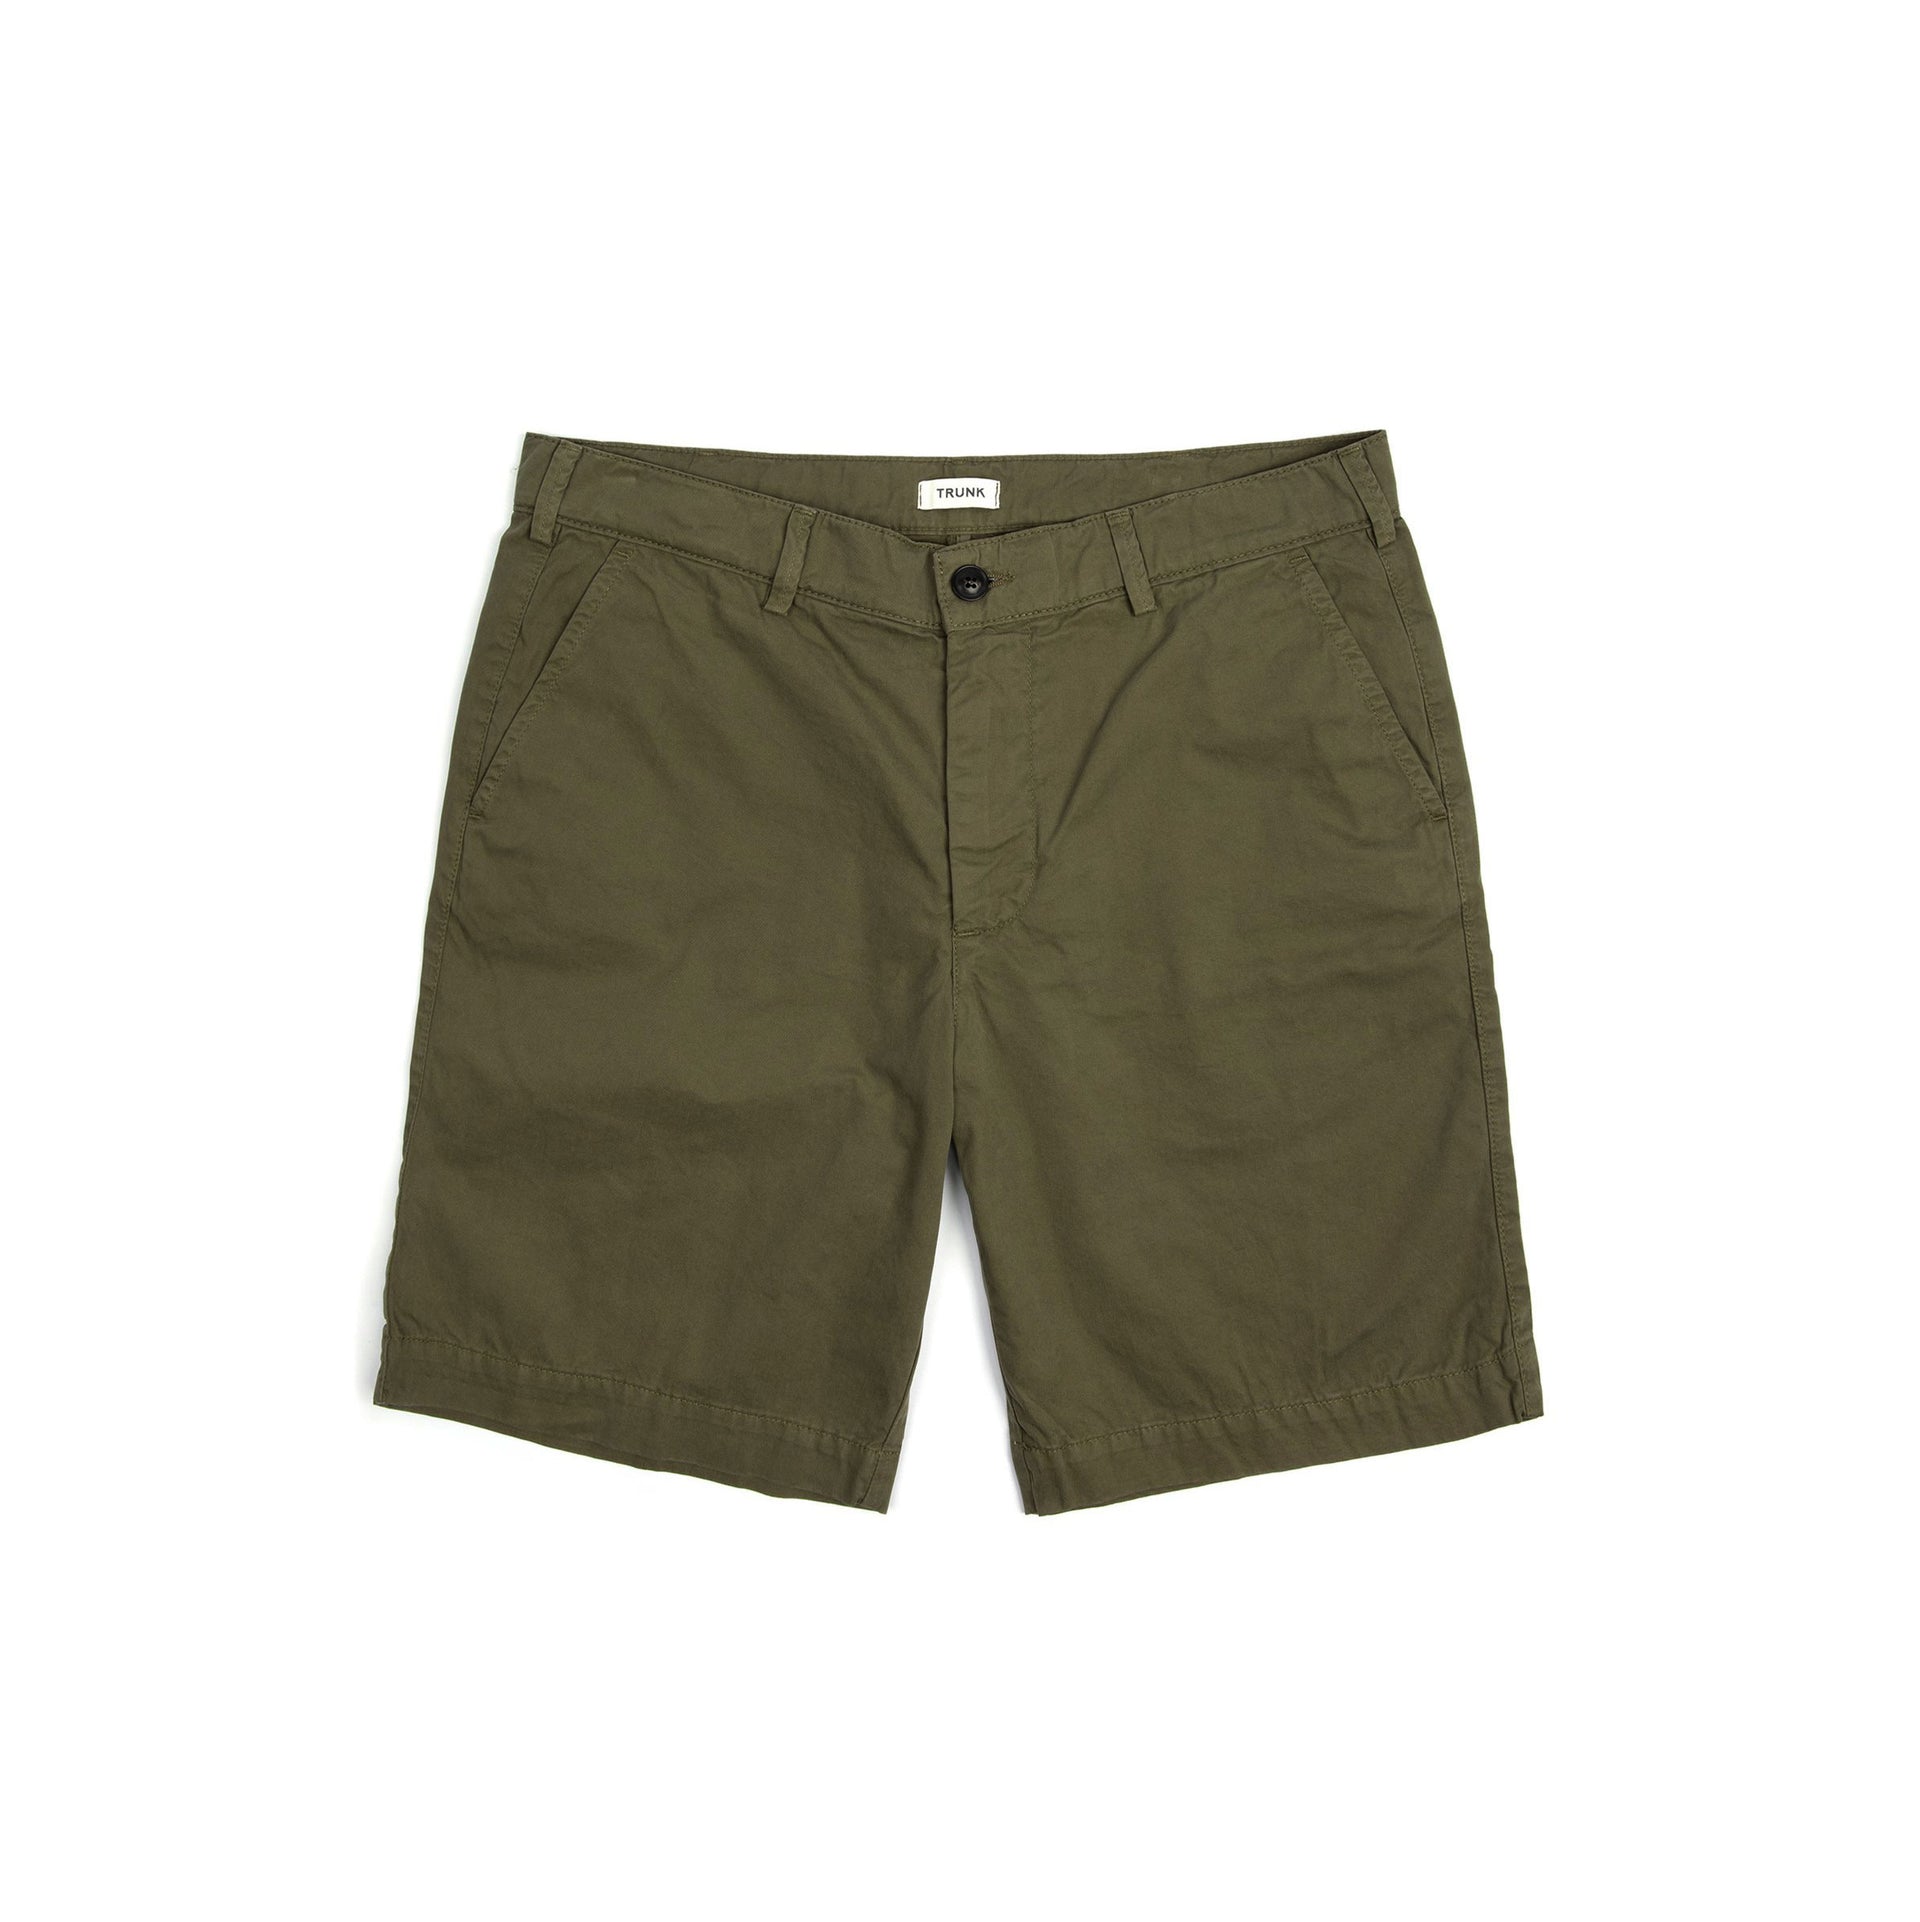 03.

The perfect shorts

Sp...